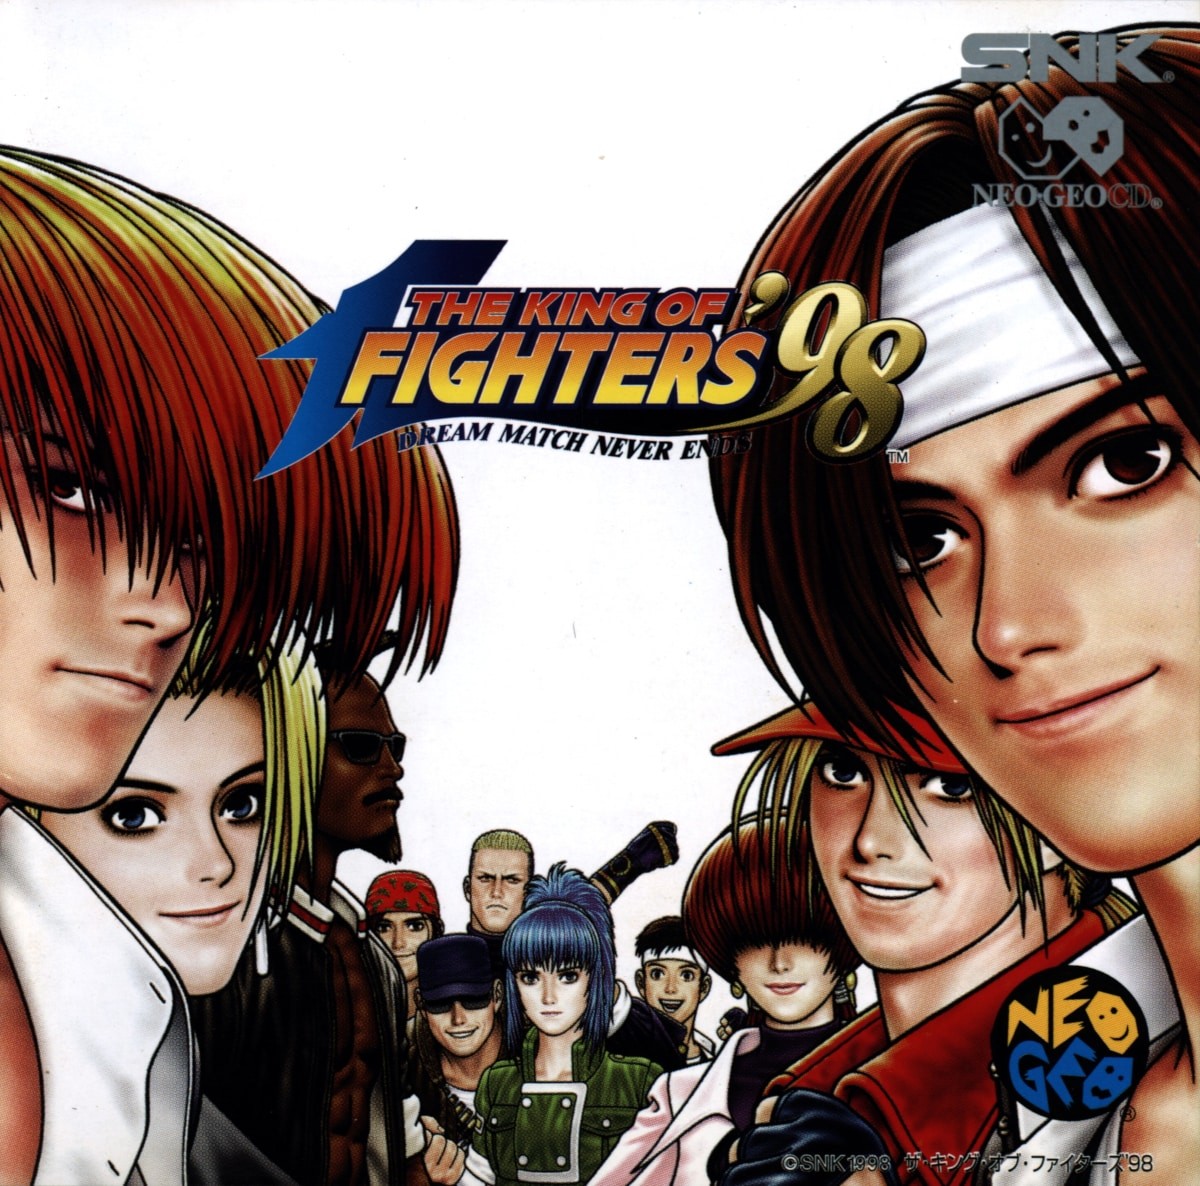 Capa do jogo The King of Fighters 98